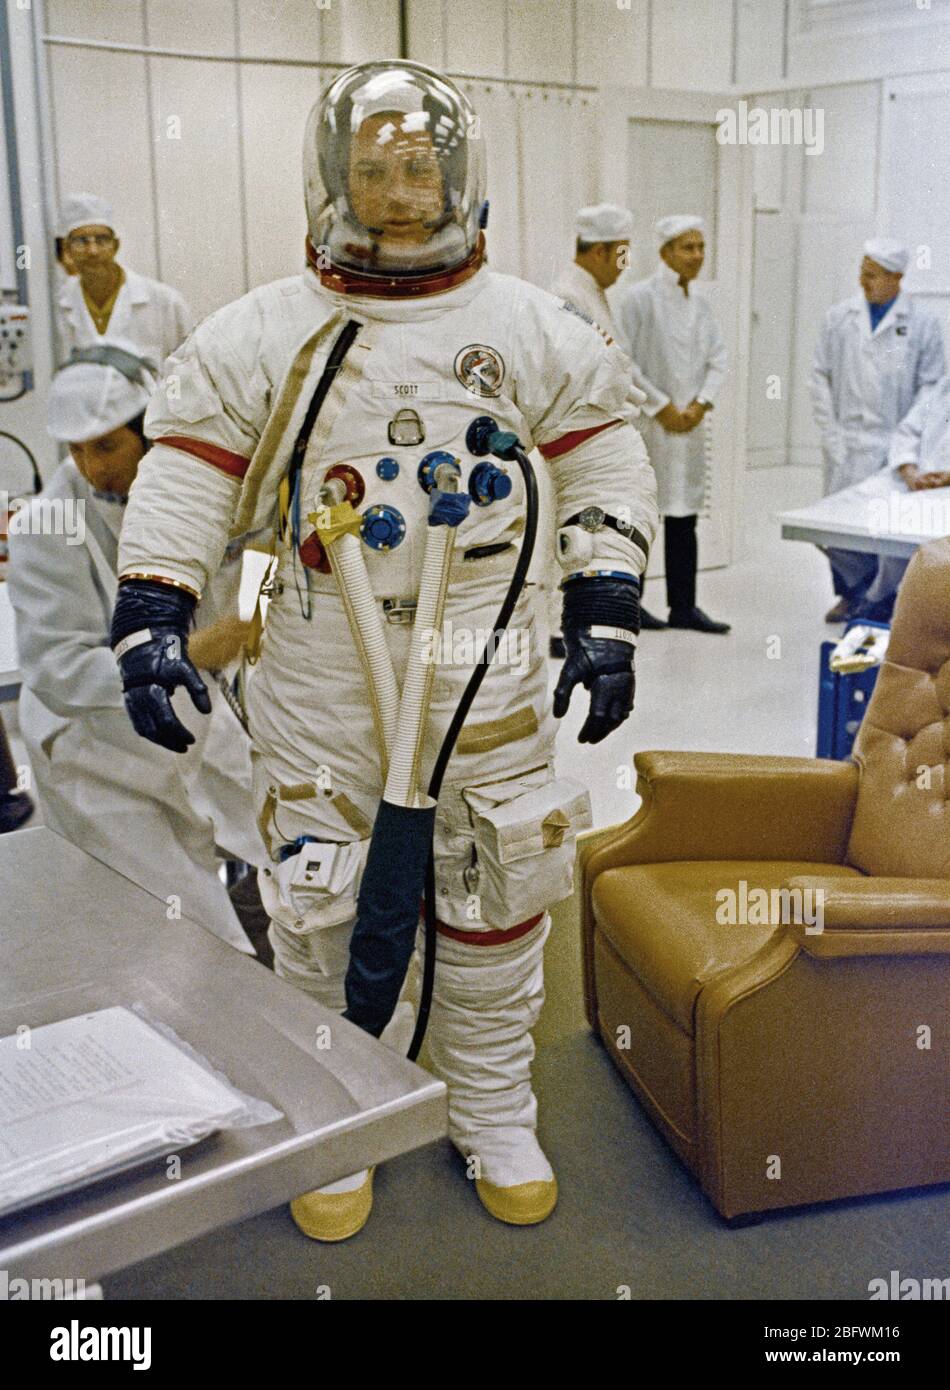 (26 July 1971) --- Astronaut David R. Scott, commander of the Apollo 15 lunar landing mission, goes through suiting up operations Stock Photo